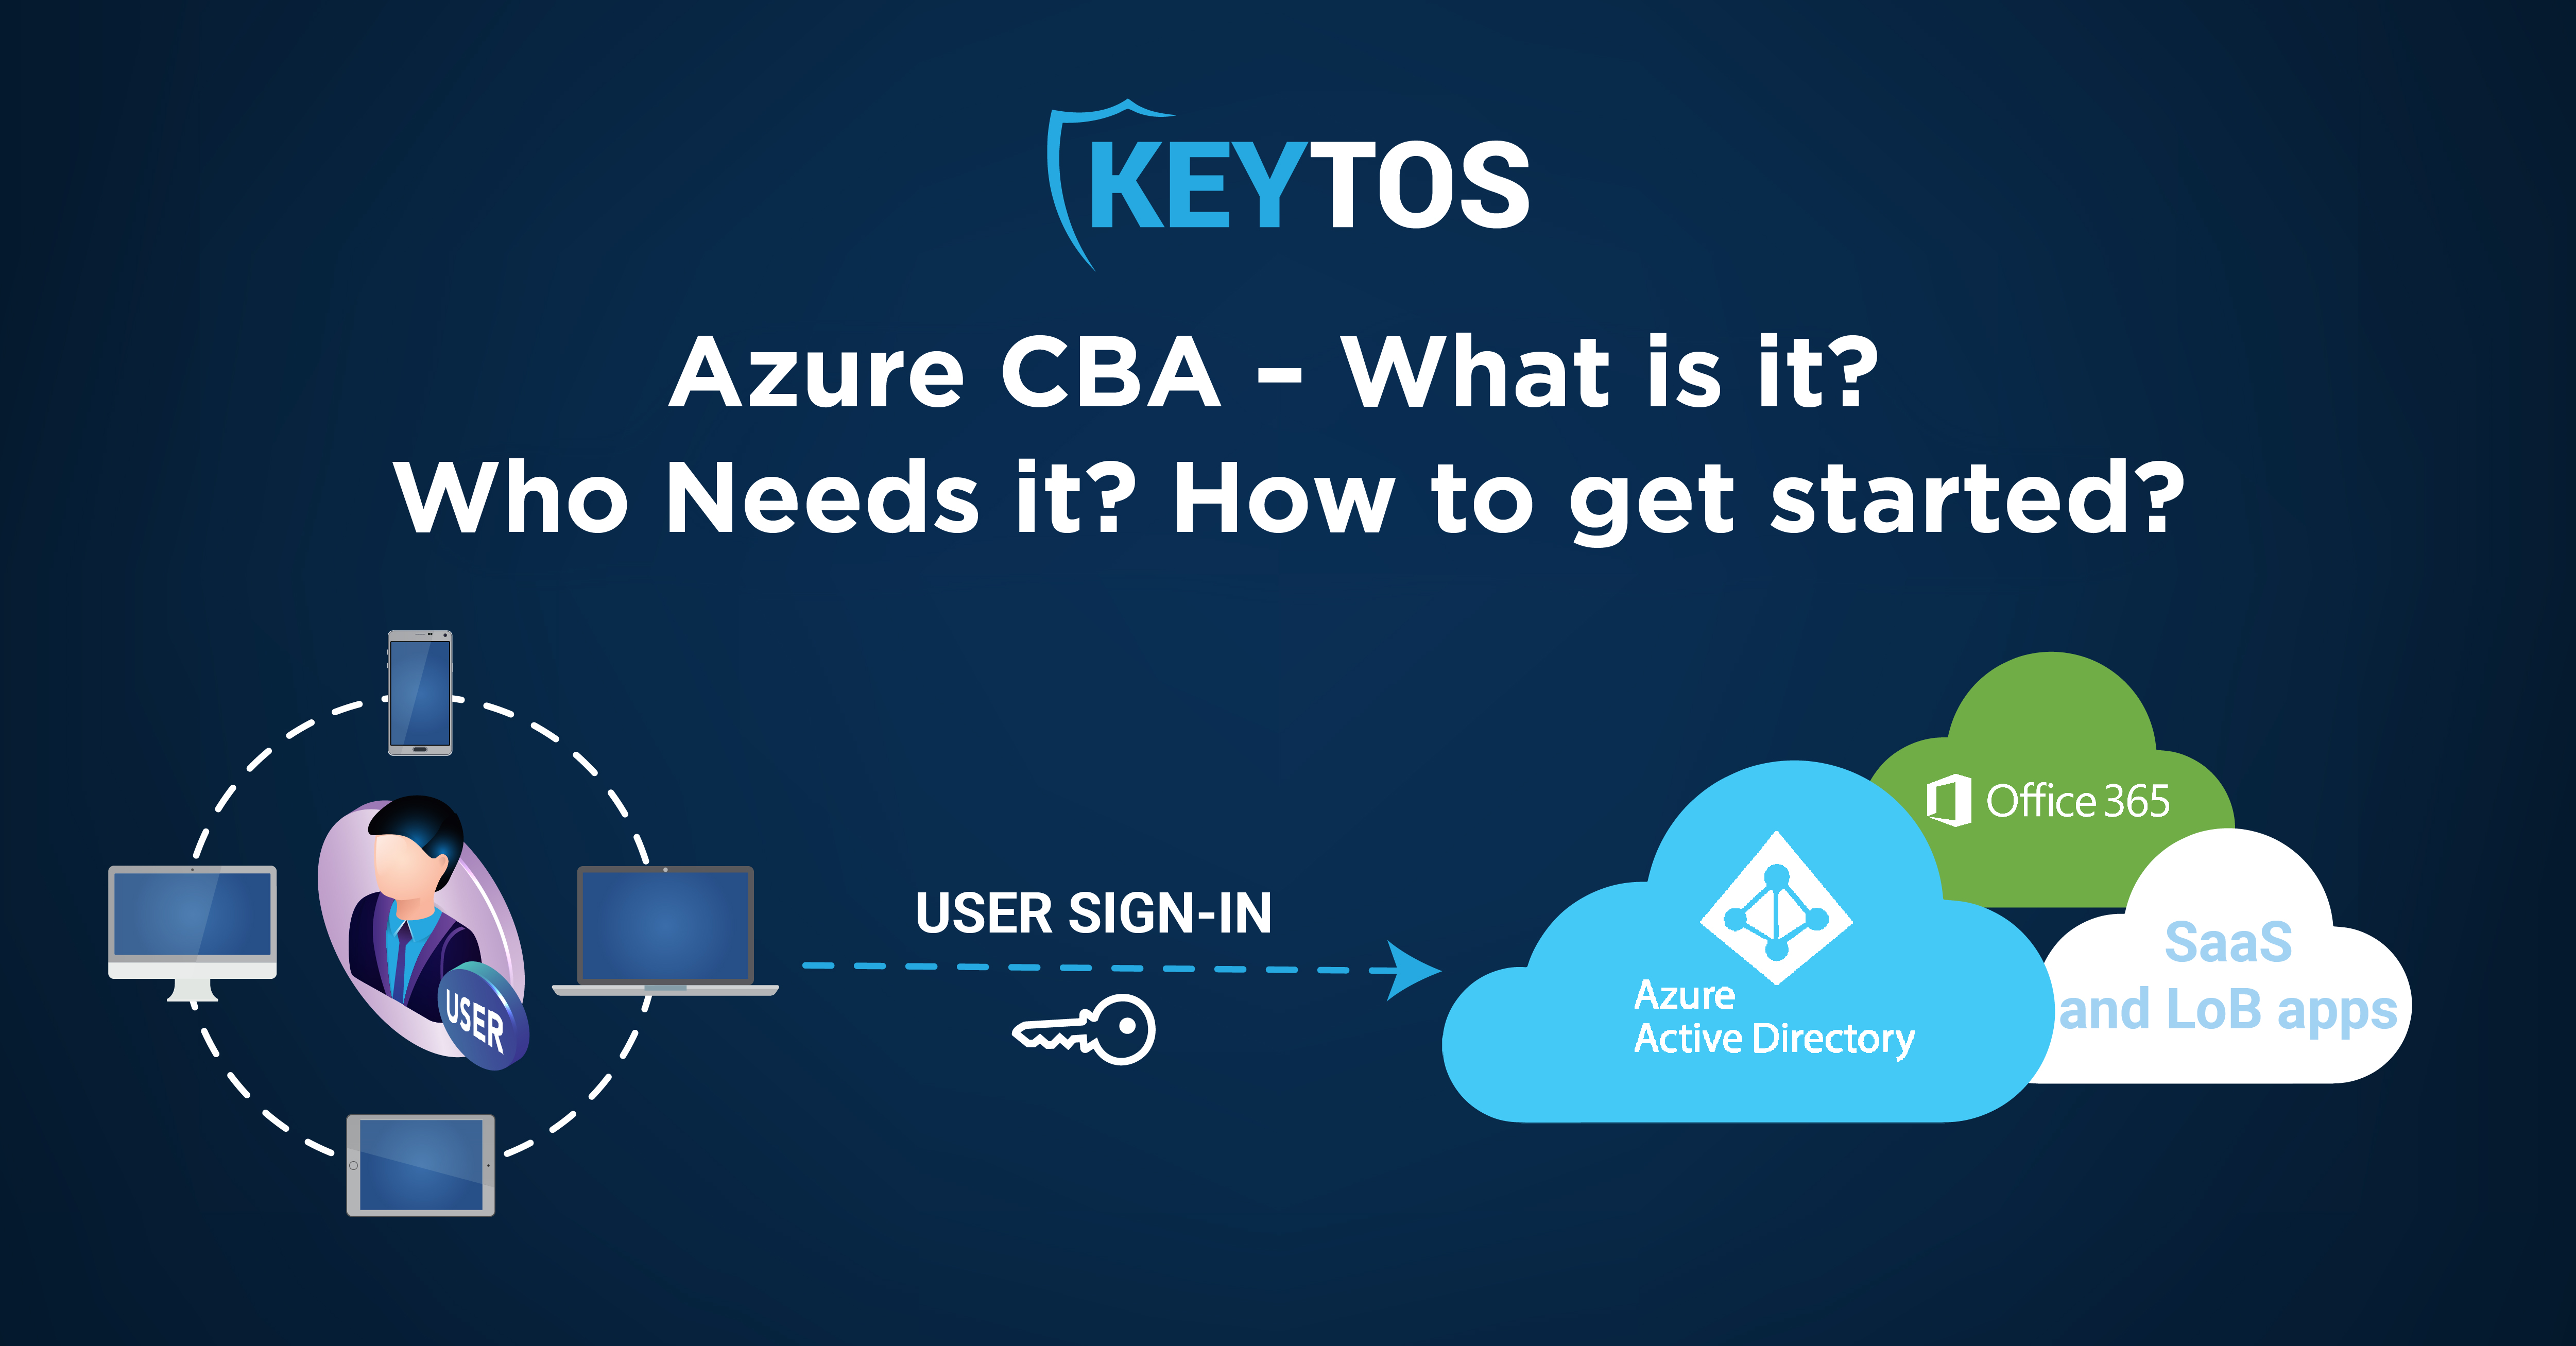 How to Get Started with Entra CBA (Azure CBA)